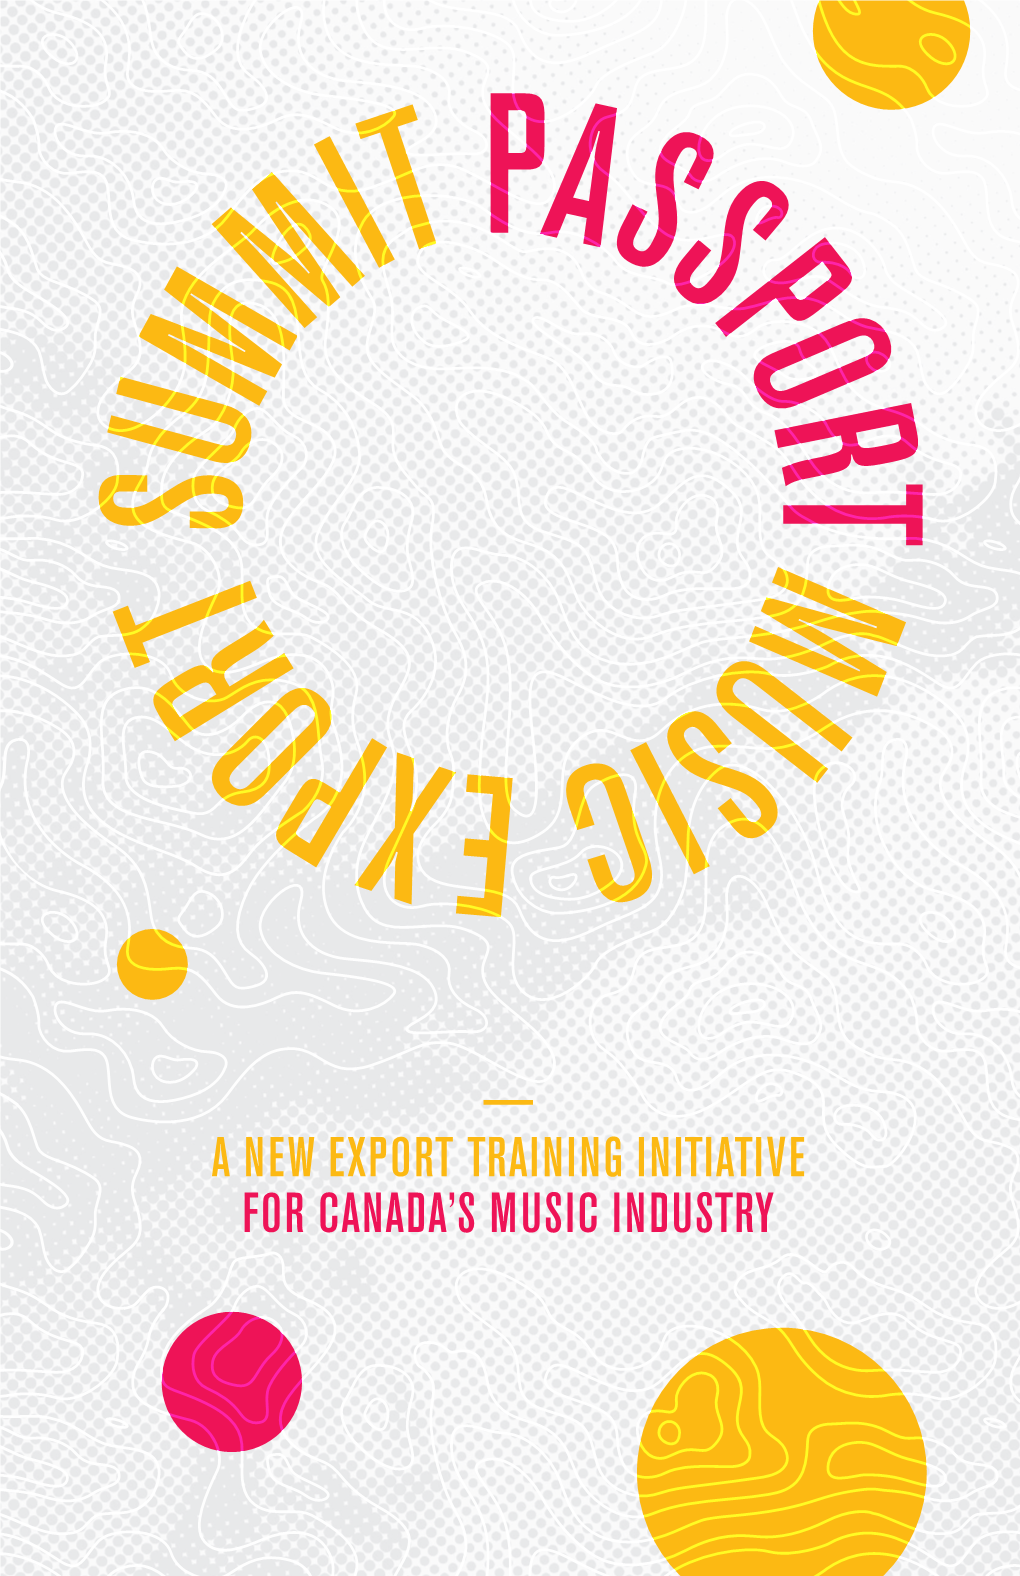 A New Export Training Initiative for Canada's Music Industry